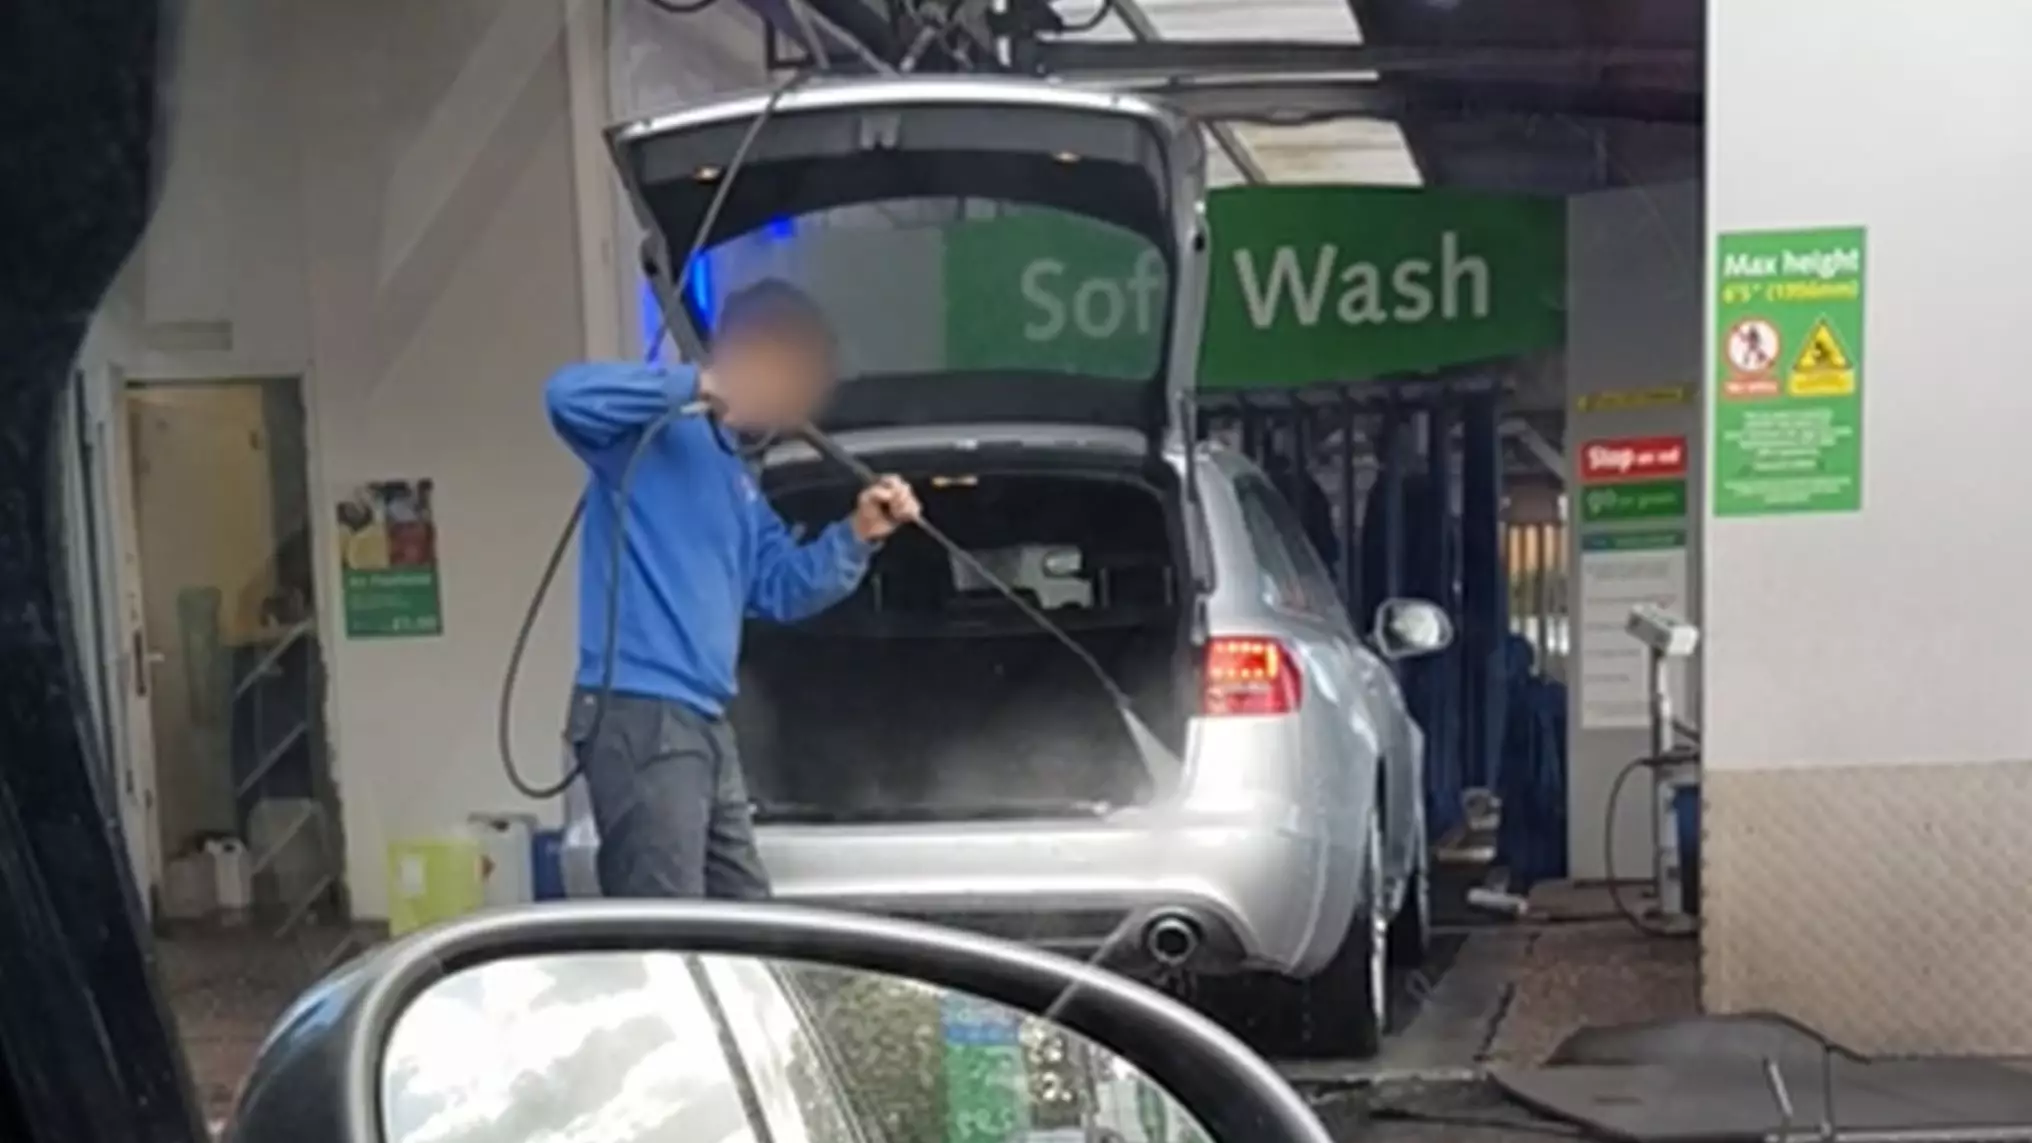 Bizarre Video Of Car Service Worker Jet Washing Inside Of Customer's Vehicle Goes Viral